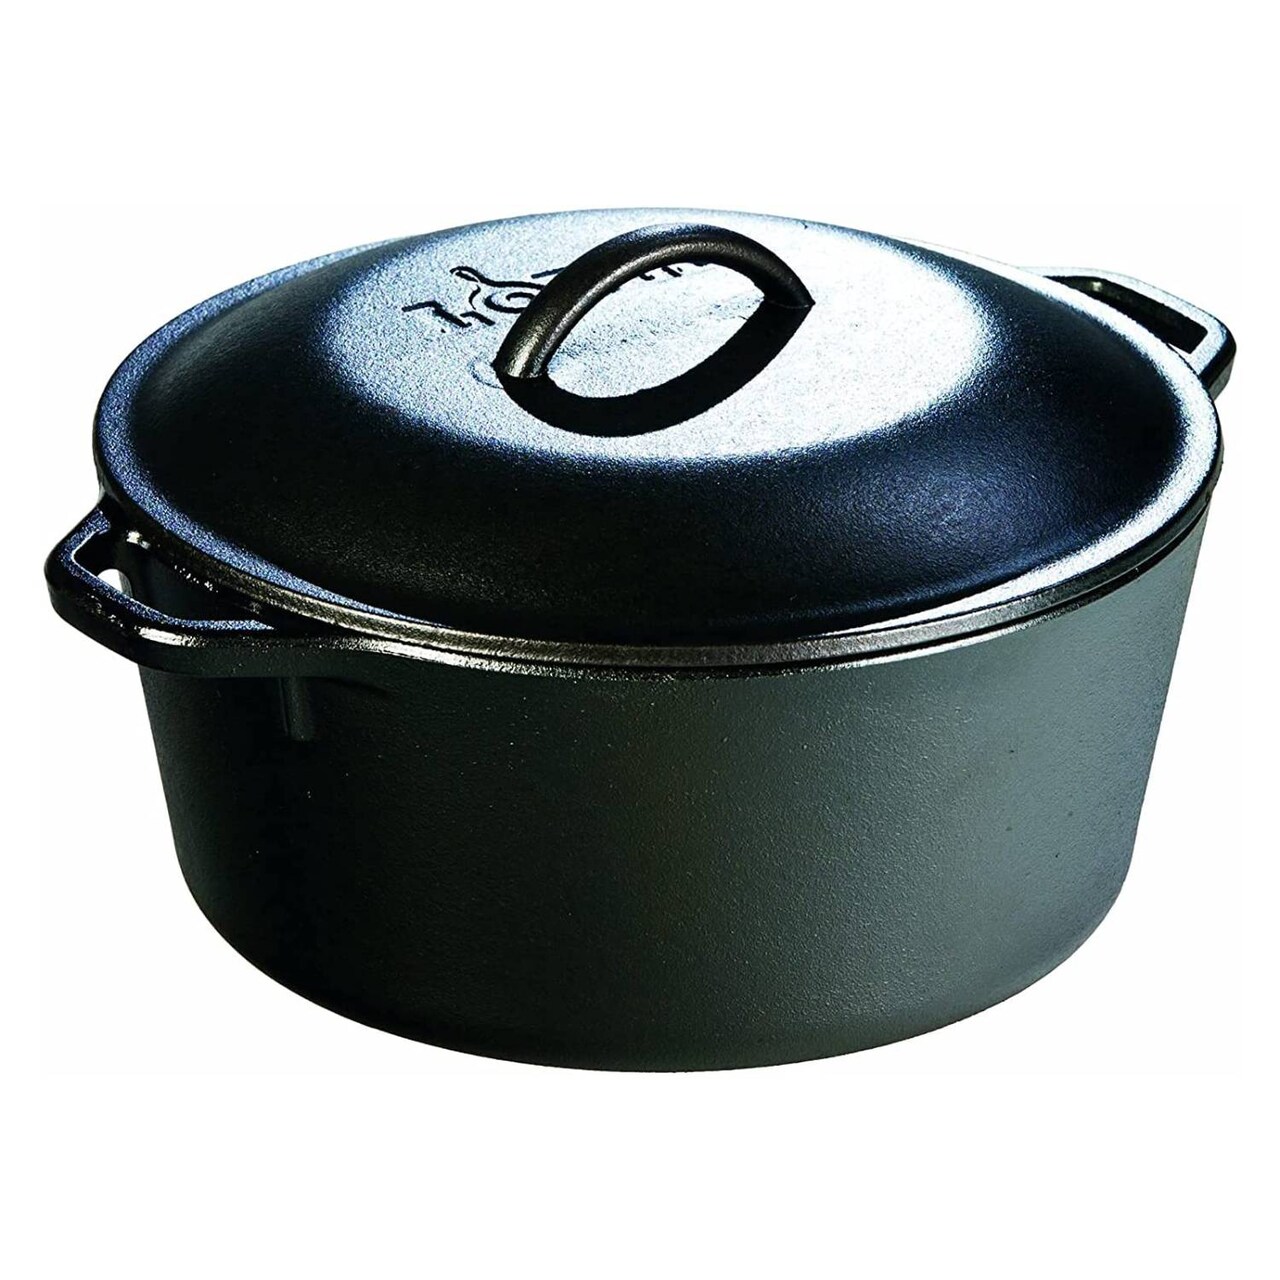 Lodge Cast Iron Dutch Oven with Dual Handles, Pre-Seasoned Cooking